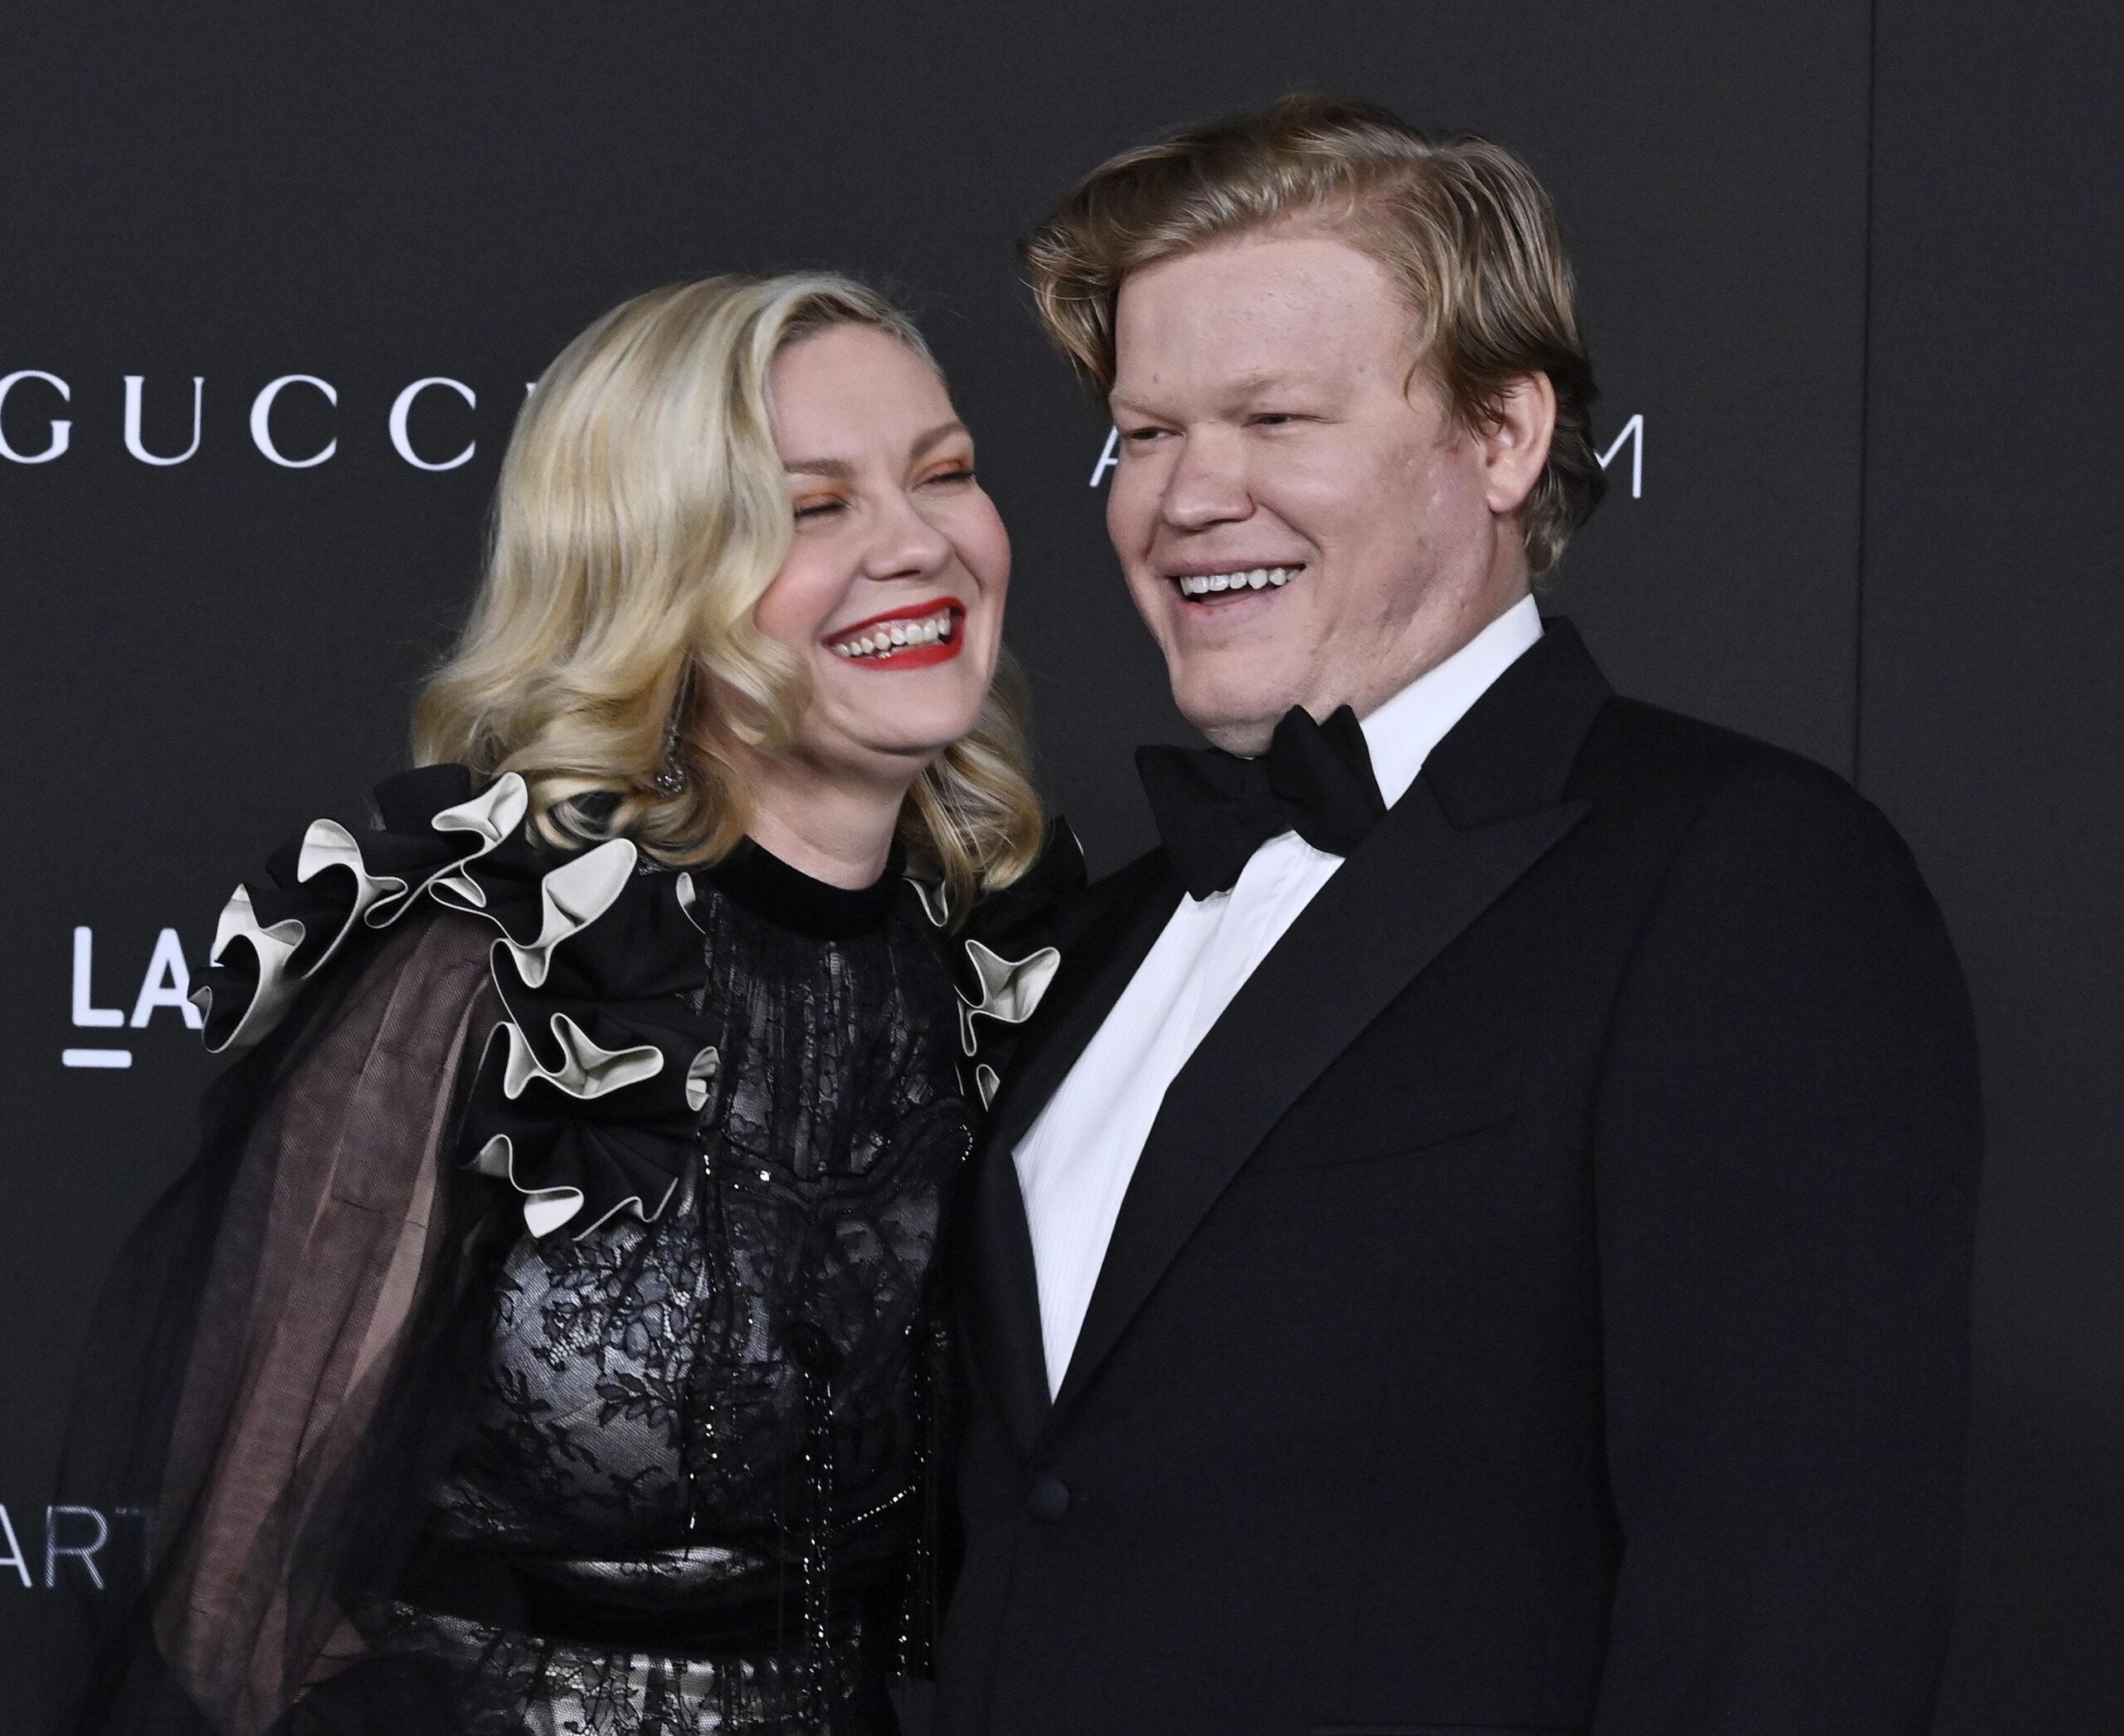 Kirsten Dunst and Jesse Plemons Attend LACMA's Art+Film Gala in Los Angeles